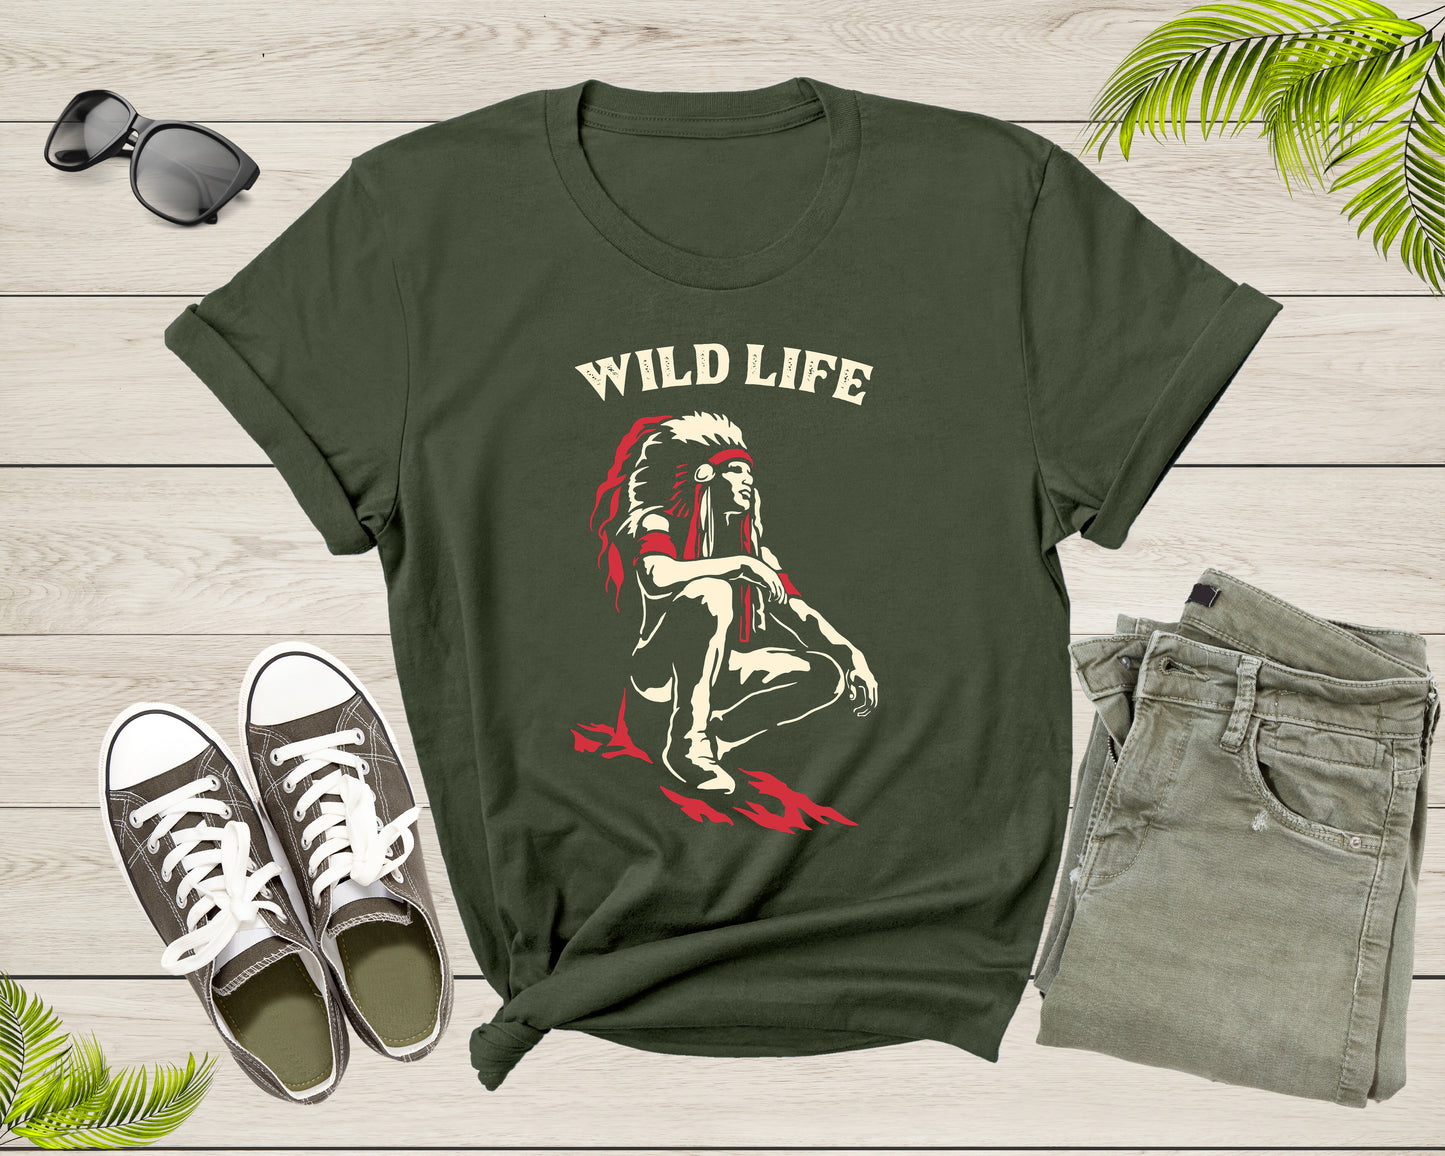 Wild Life Cool Native American Indian Indigenous People T-Shirt Native Historic Gift Lover T Shirt for Men Women Boys Girls Teens Tshirt